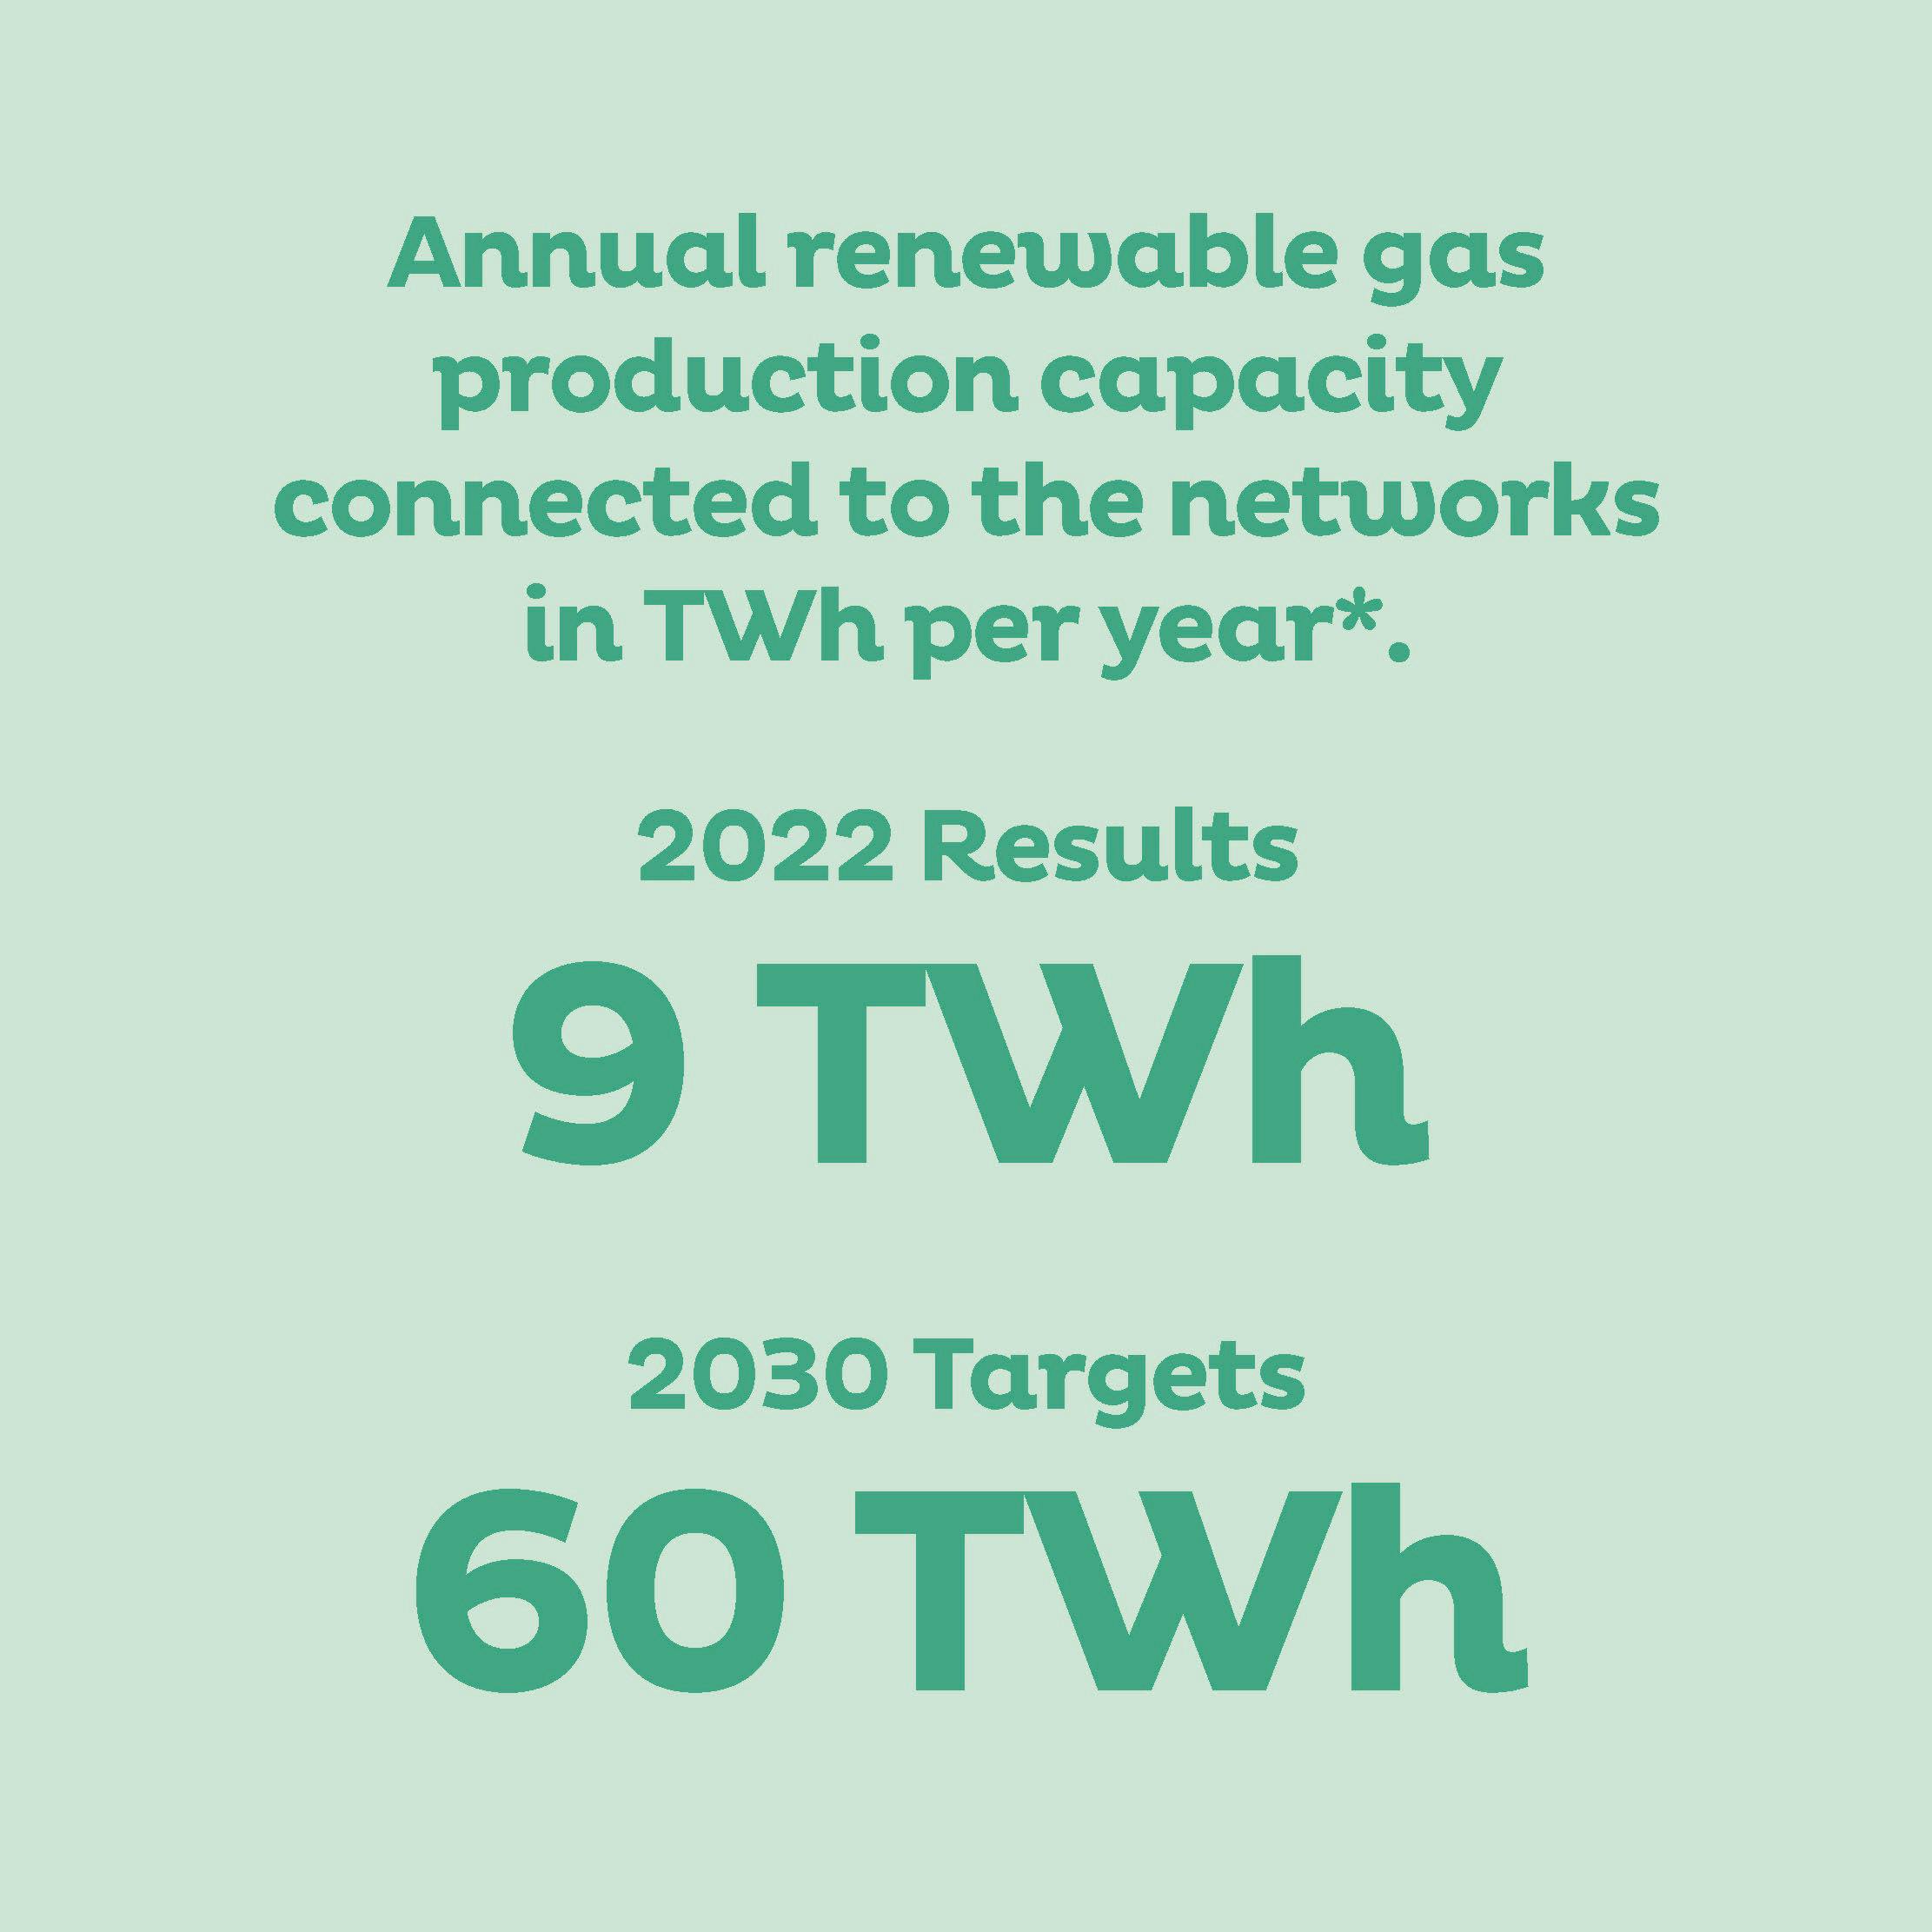 Annual renewable gas production capacity connected to the networks in TWh per year* 2022 Targets 9 TWh 2030 Targets 60 TWh